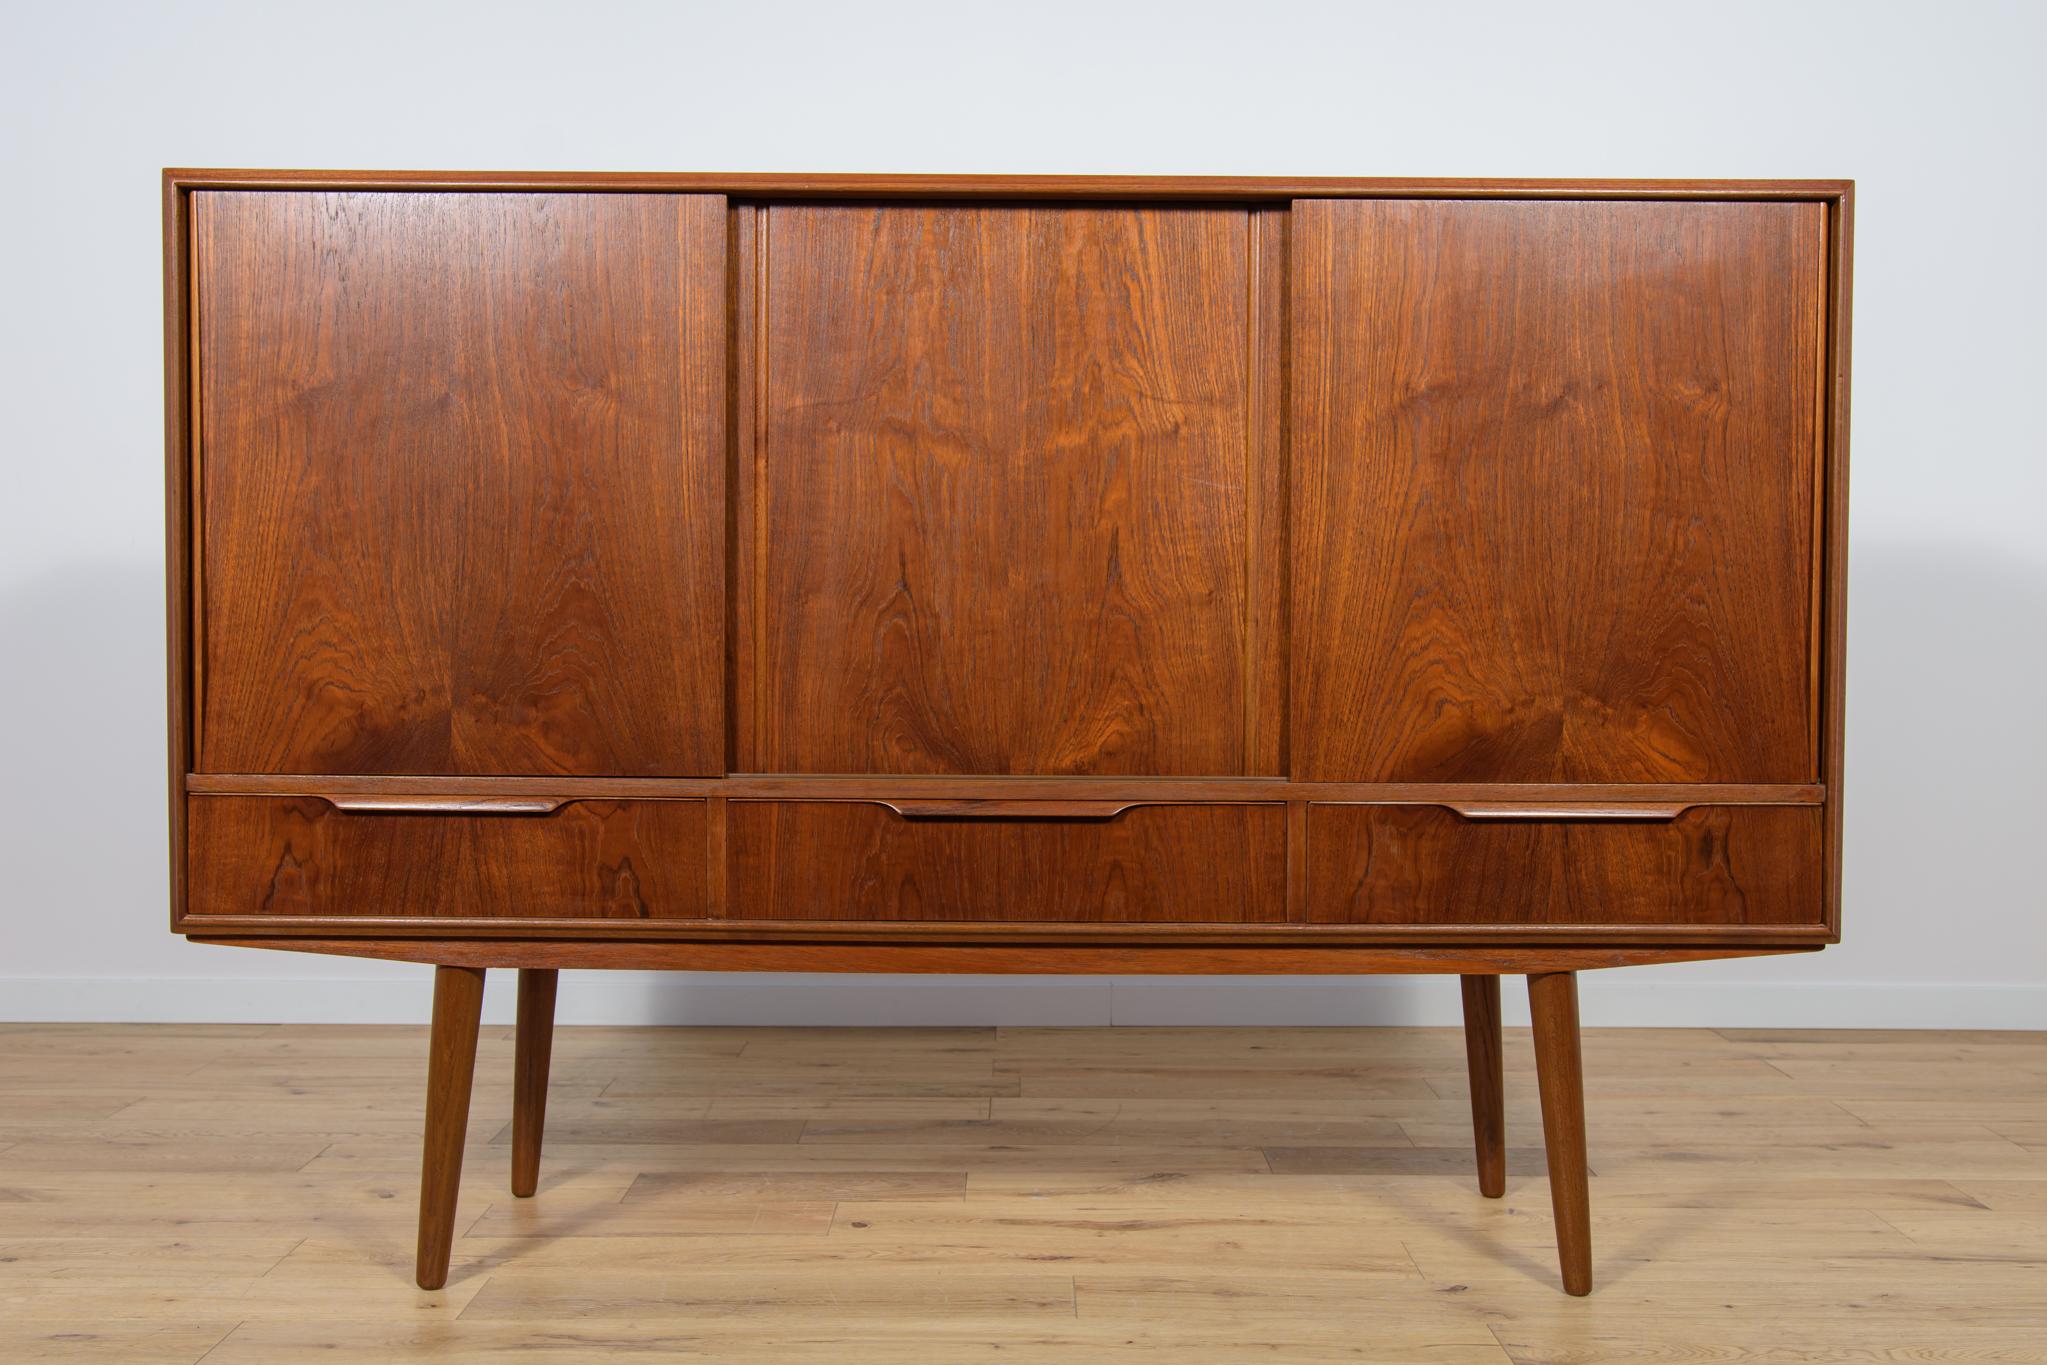 Danish sideboard in teak designed by EW Bach for Sejling Skabe in the 60s. The chest of drawers has three drawers at the bottom and three sliding doors at the top. In the upper part there are shelves, a bar and two drawers. The teak elements have